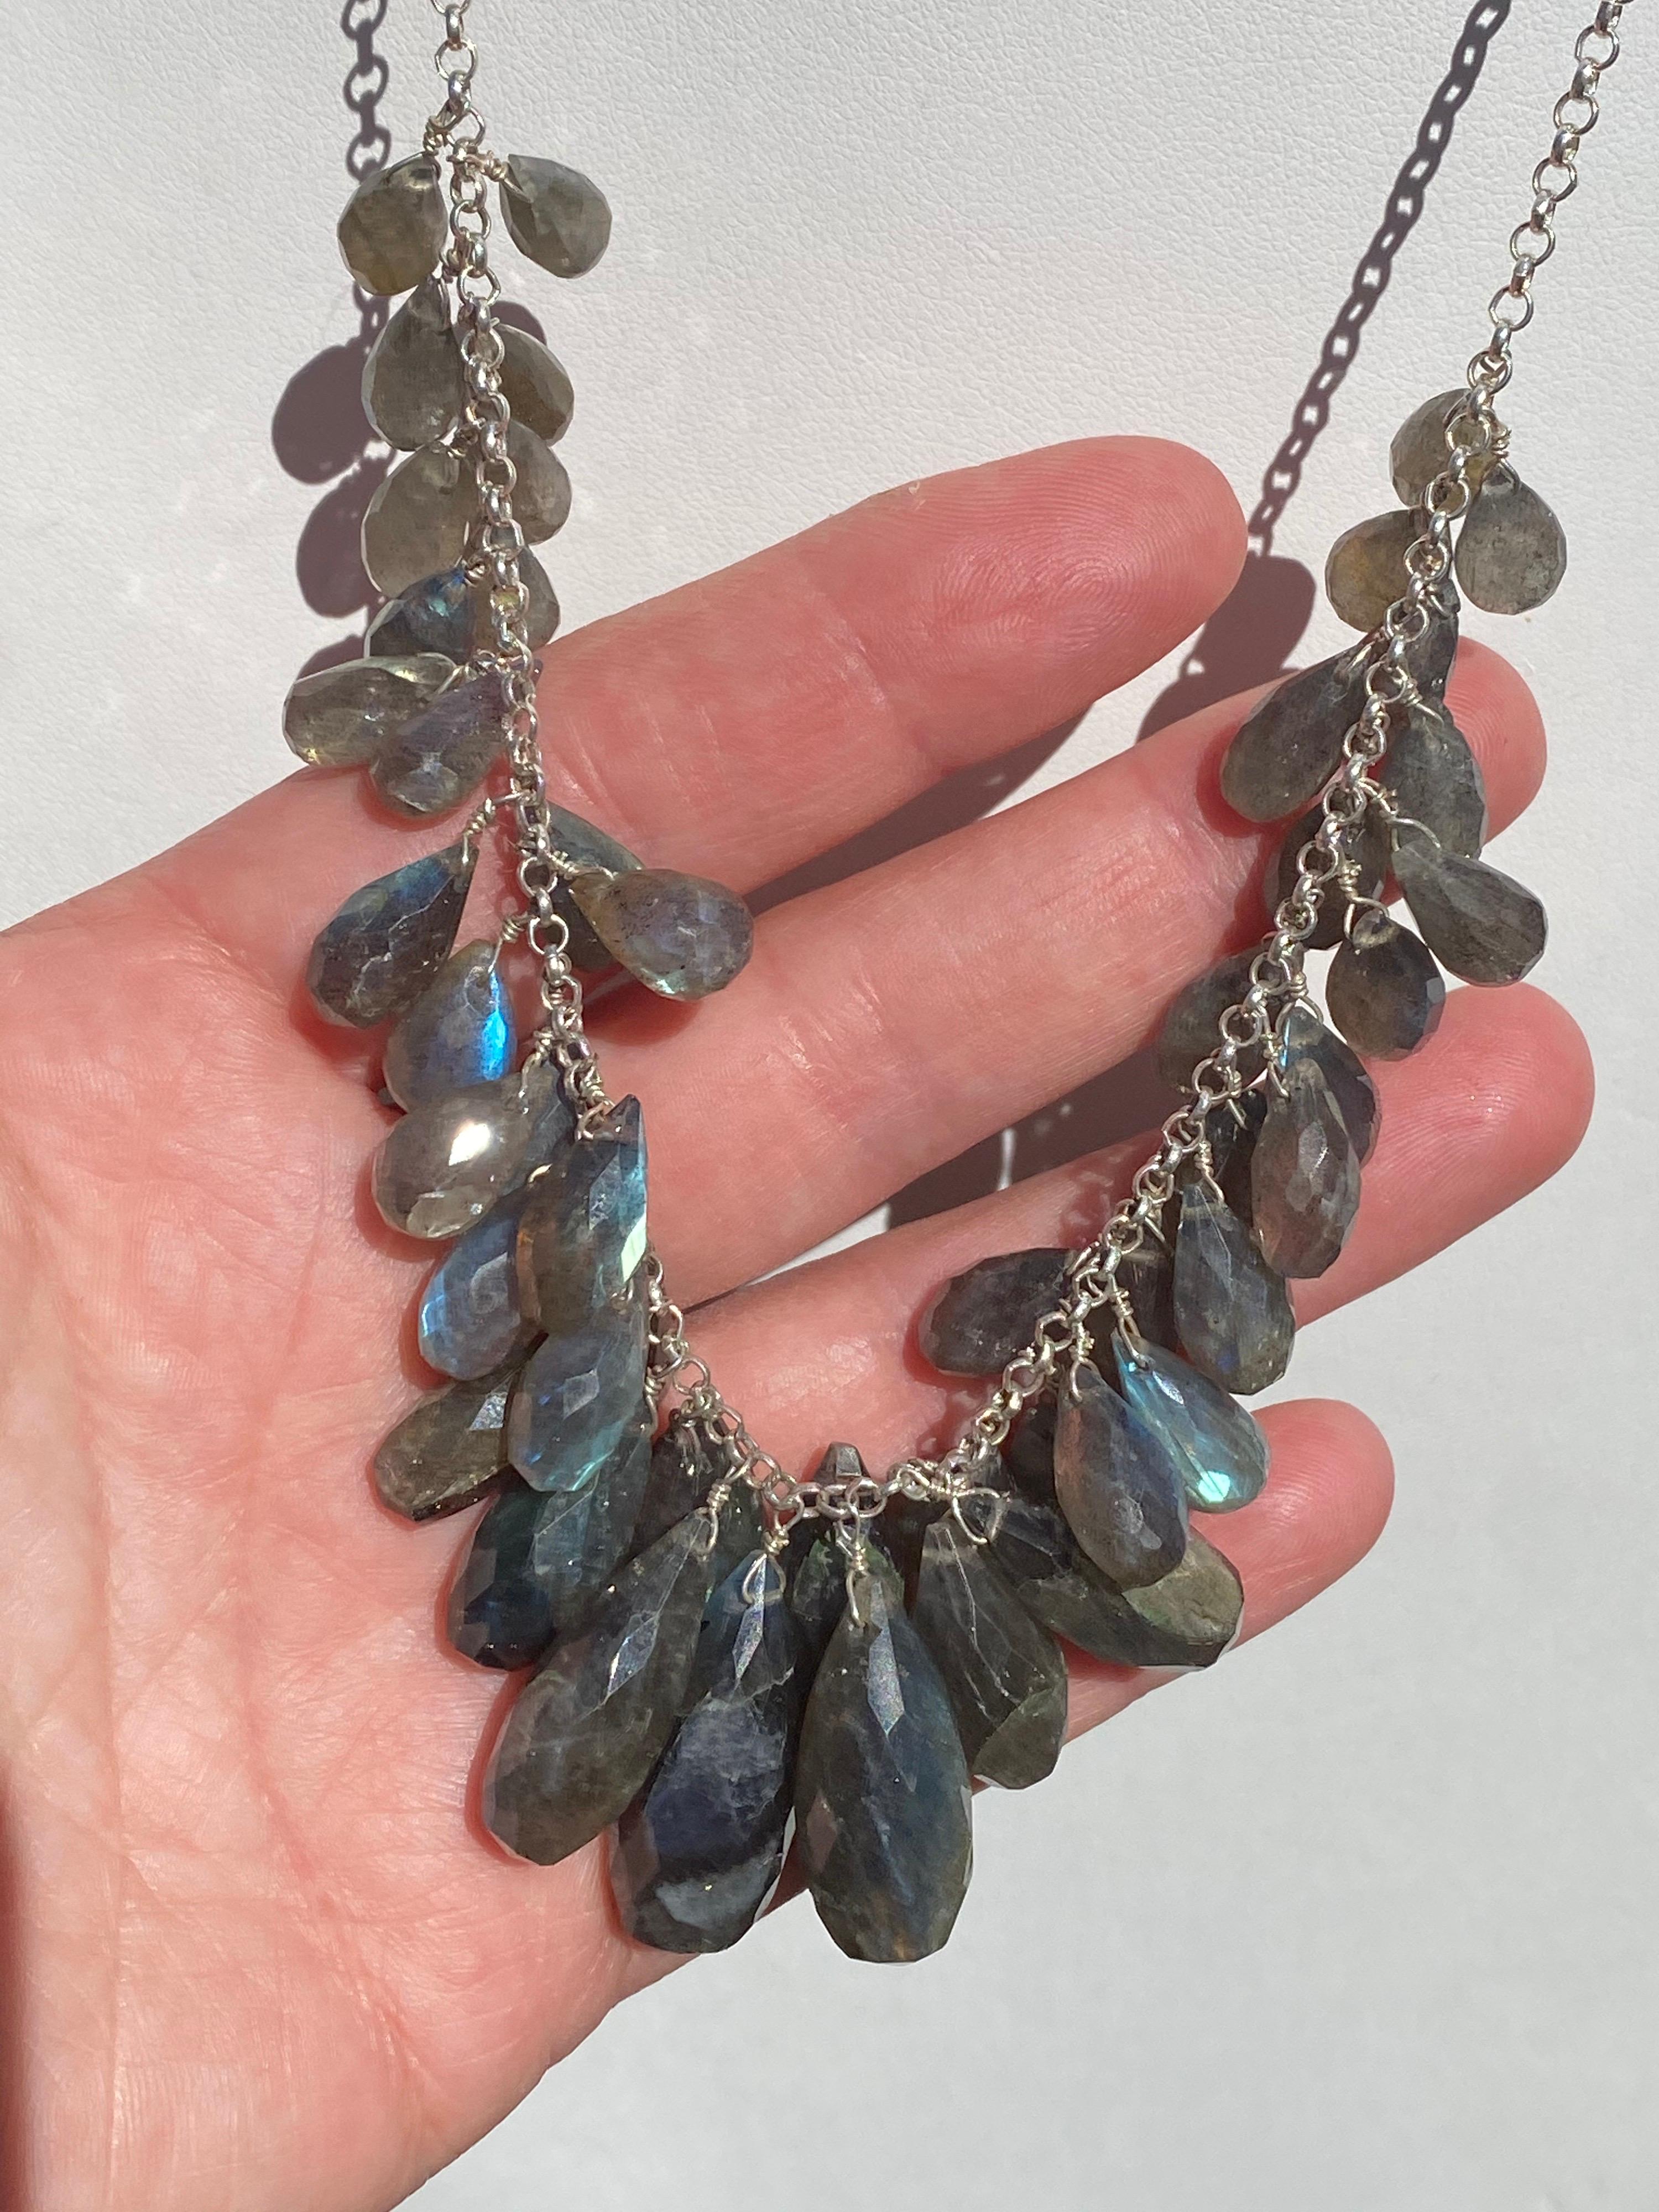 This is a lovely Sterling Silver necklace with 50 Briolette Labradorite Gemstones that are hand-wired wrapped and cascade down on the neck in a V-shape fashion. With flashes of Blue, Green, Grey, and some Golden Flashes make it mesmerizing to look